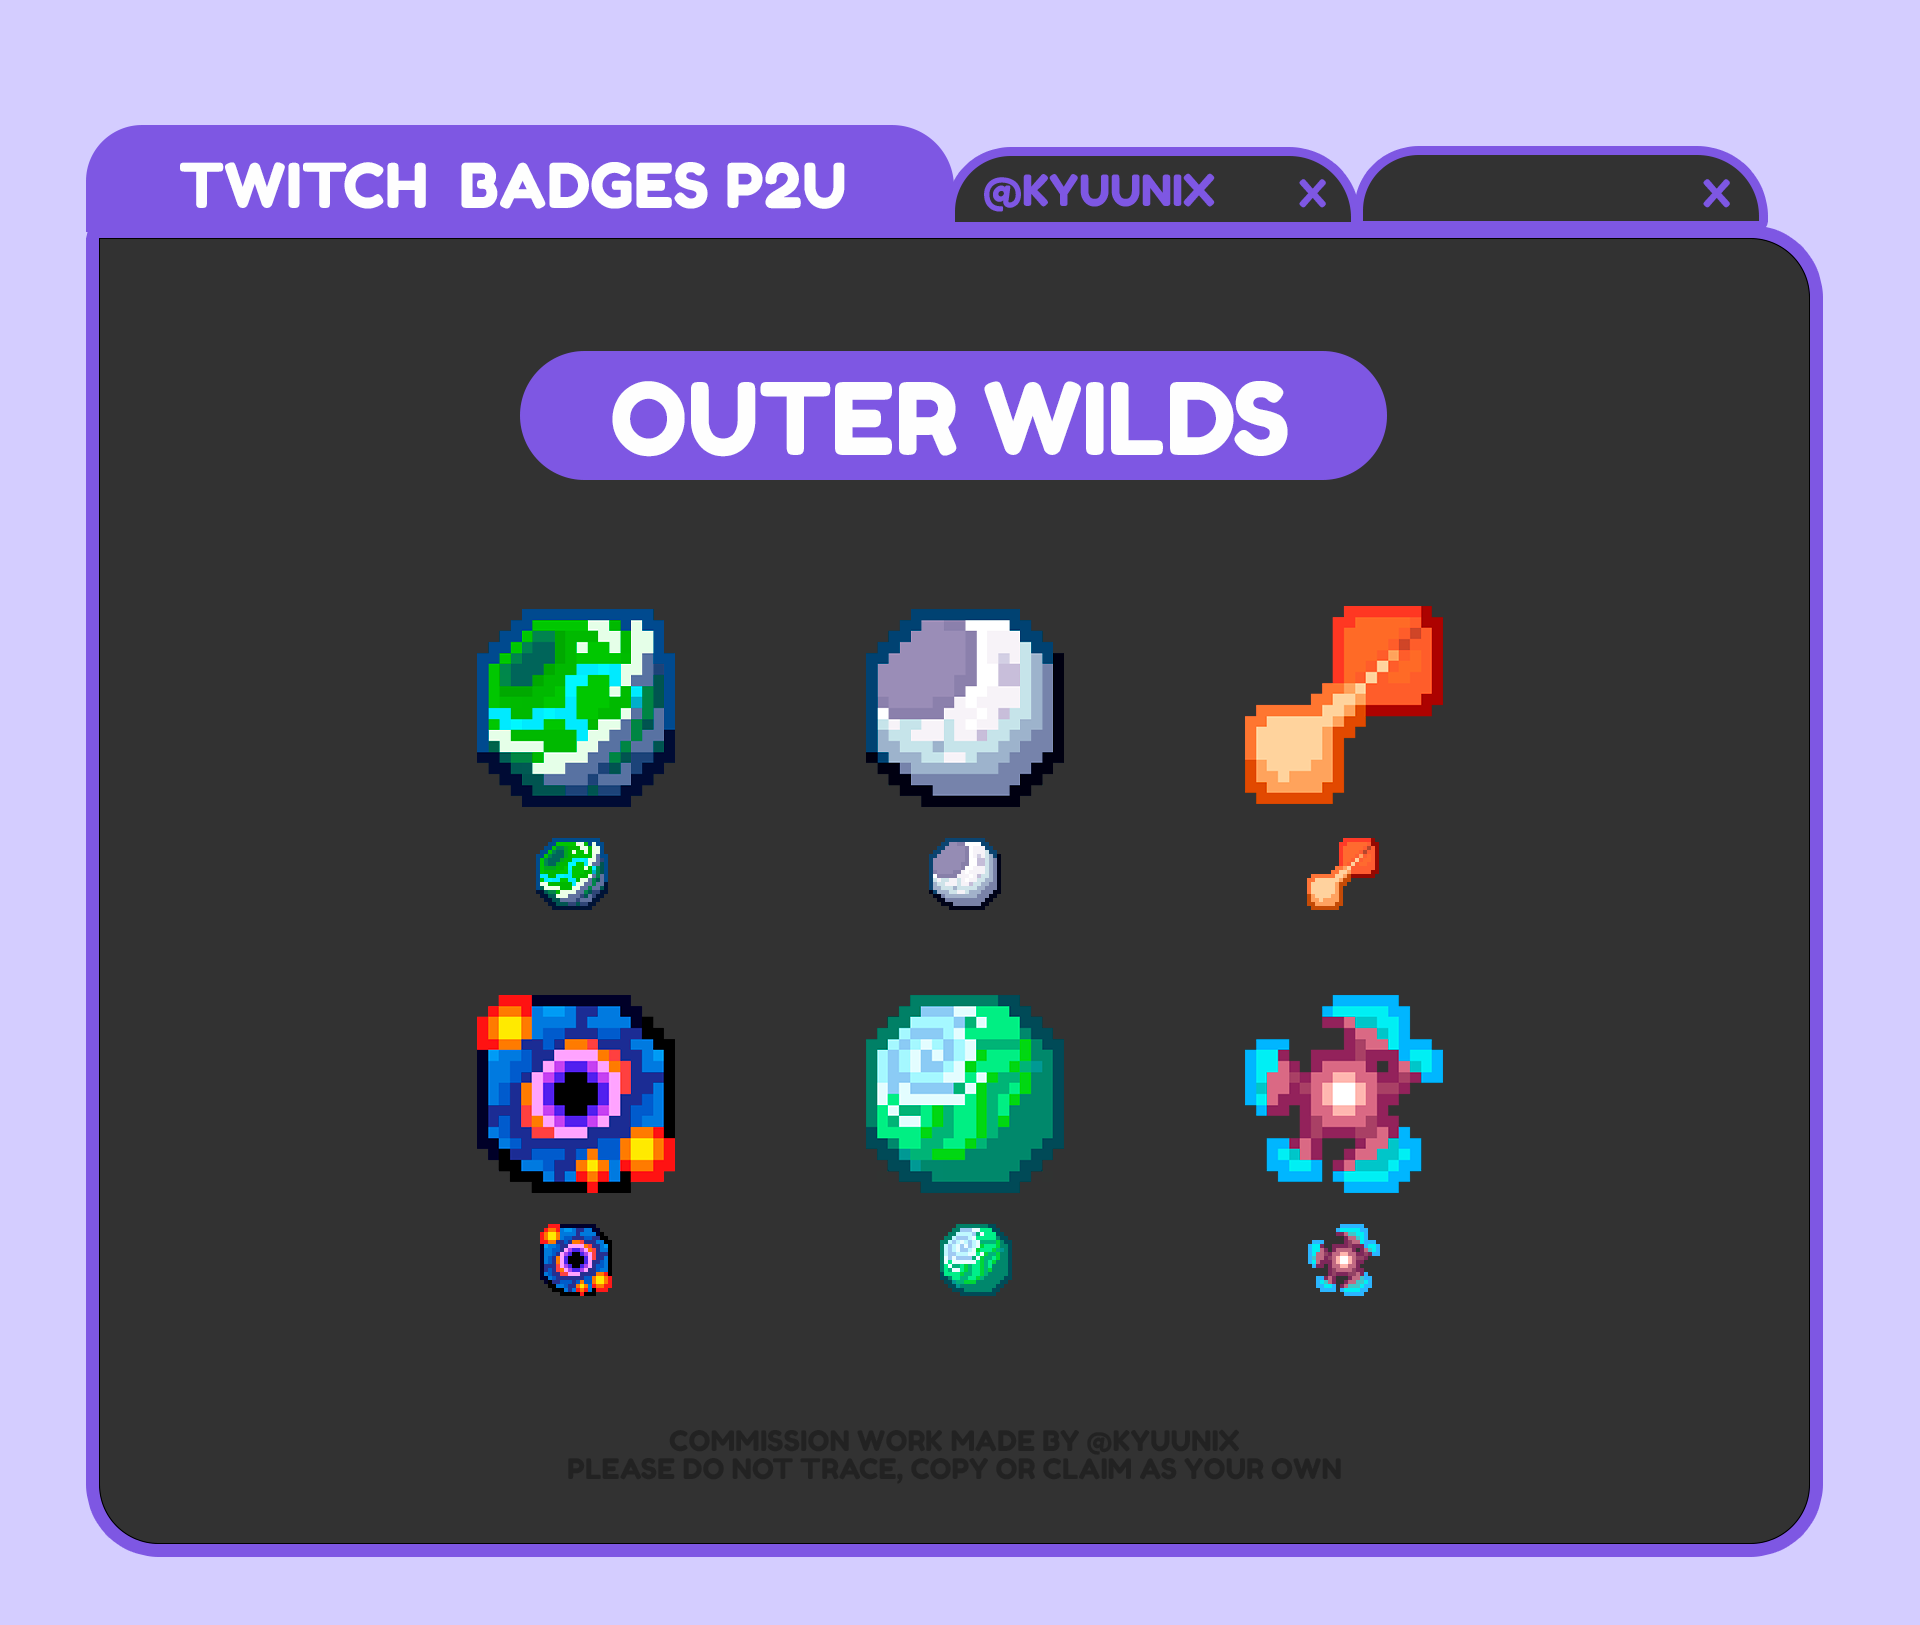 Outer Wilds badges are now available in my shop